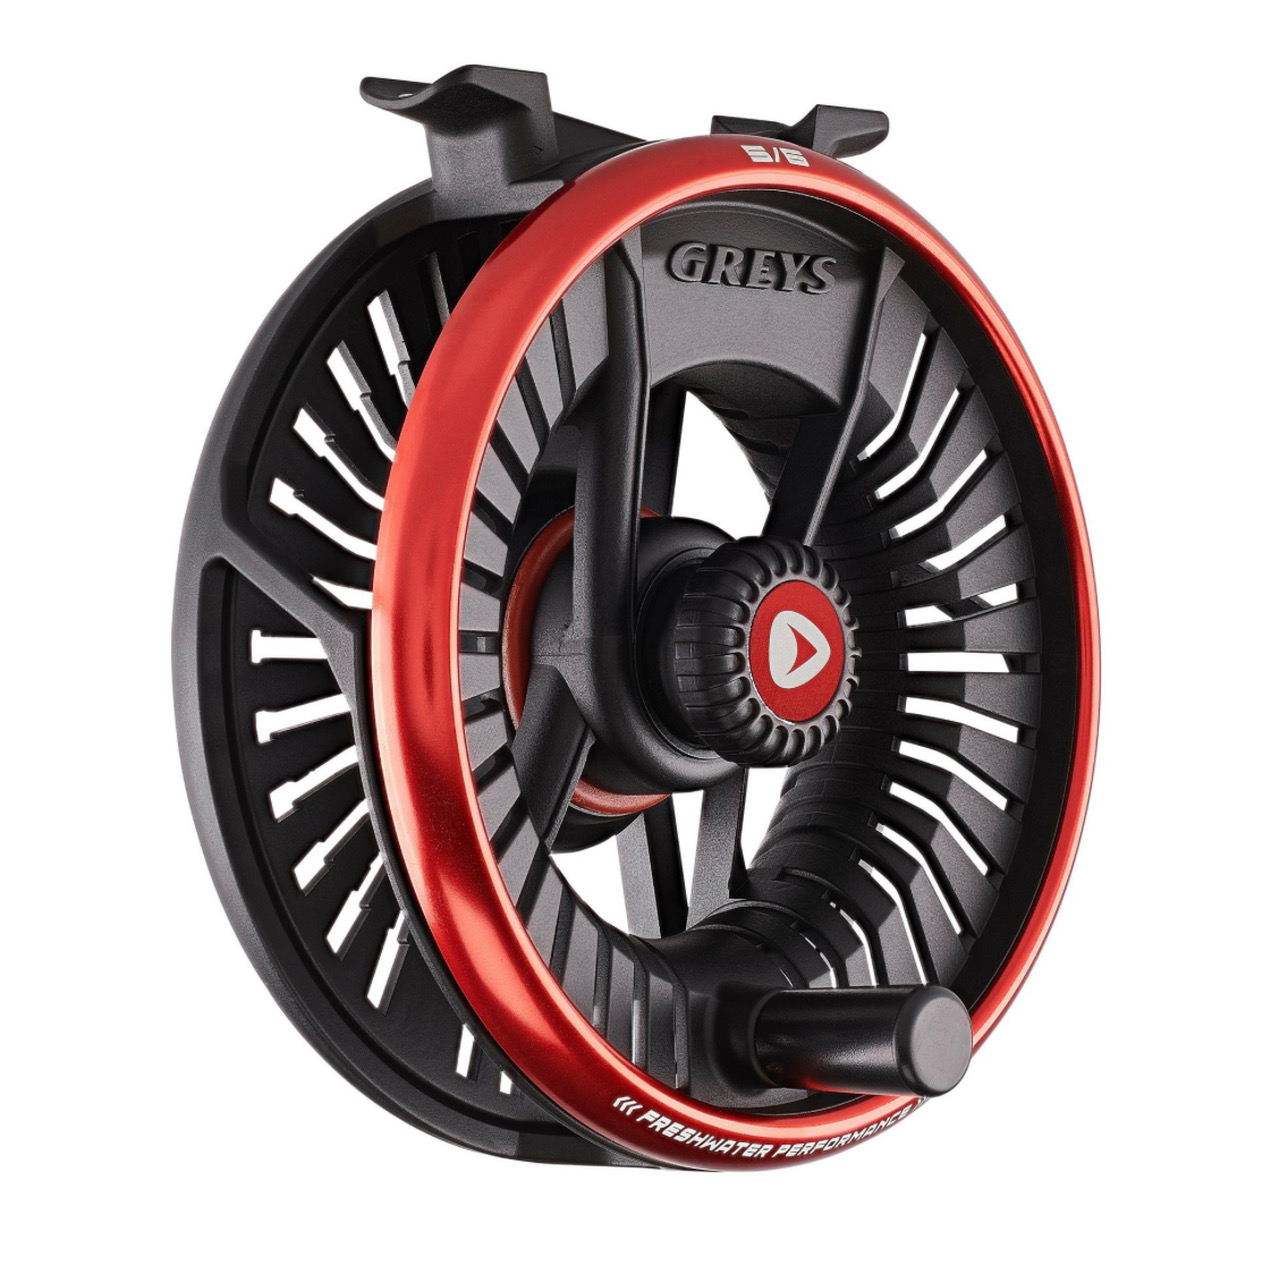 Greys Tail 7/8 Fly Reel